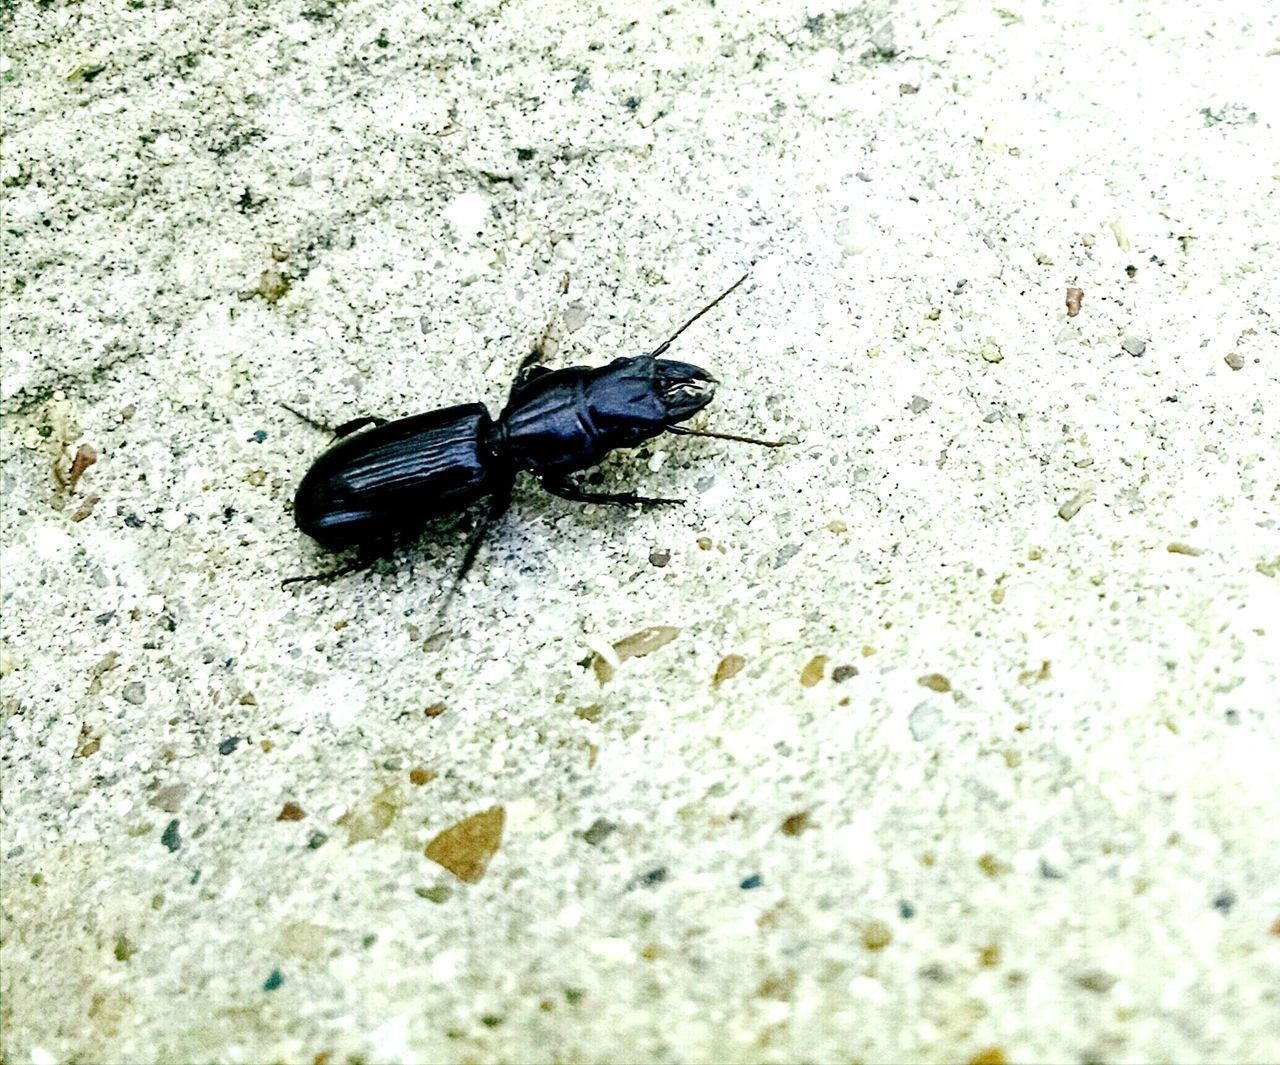 insect, one animal, animal themes, animals in the wild, high angle view, wildlife, close-up, selective focus, black color, nature, outdoors, day, textured, no people, ant, dead animal, full length, rock - object, ground, beetle